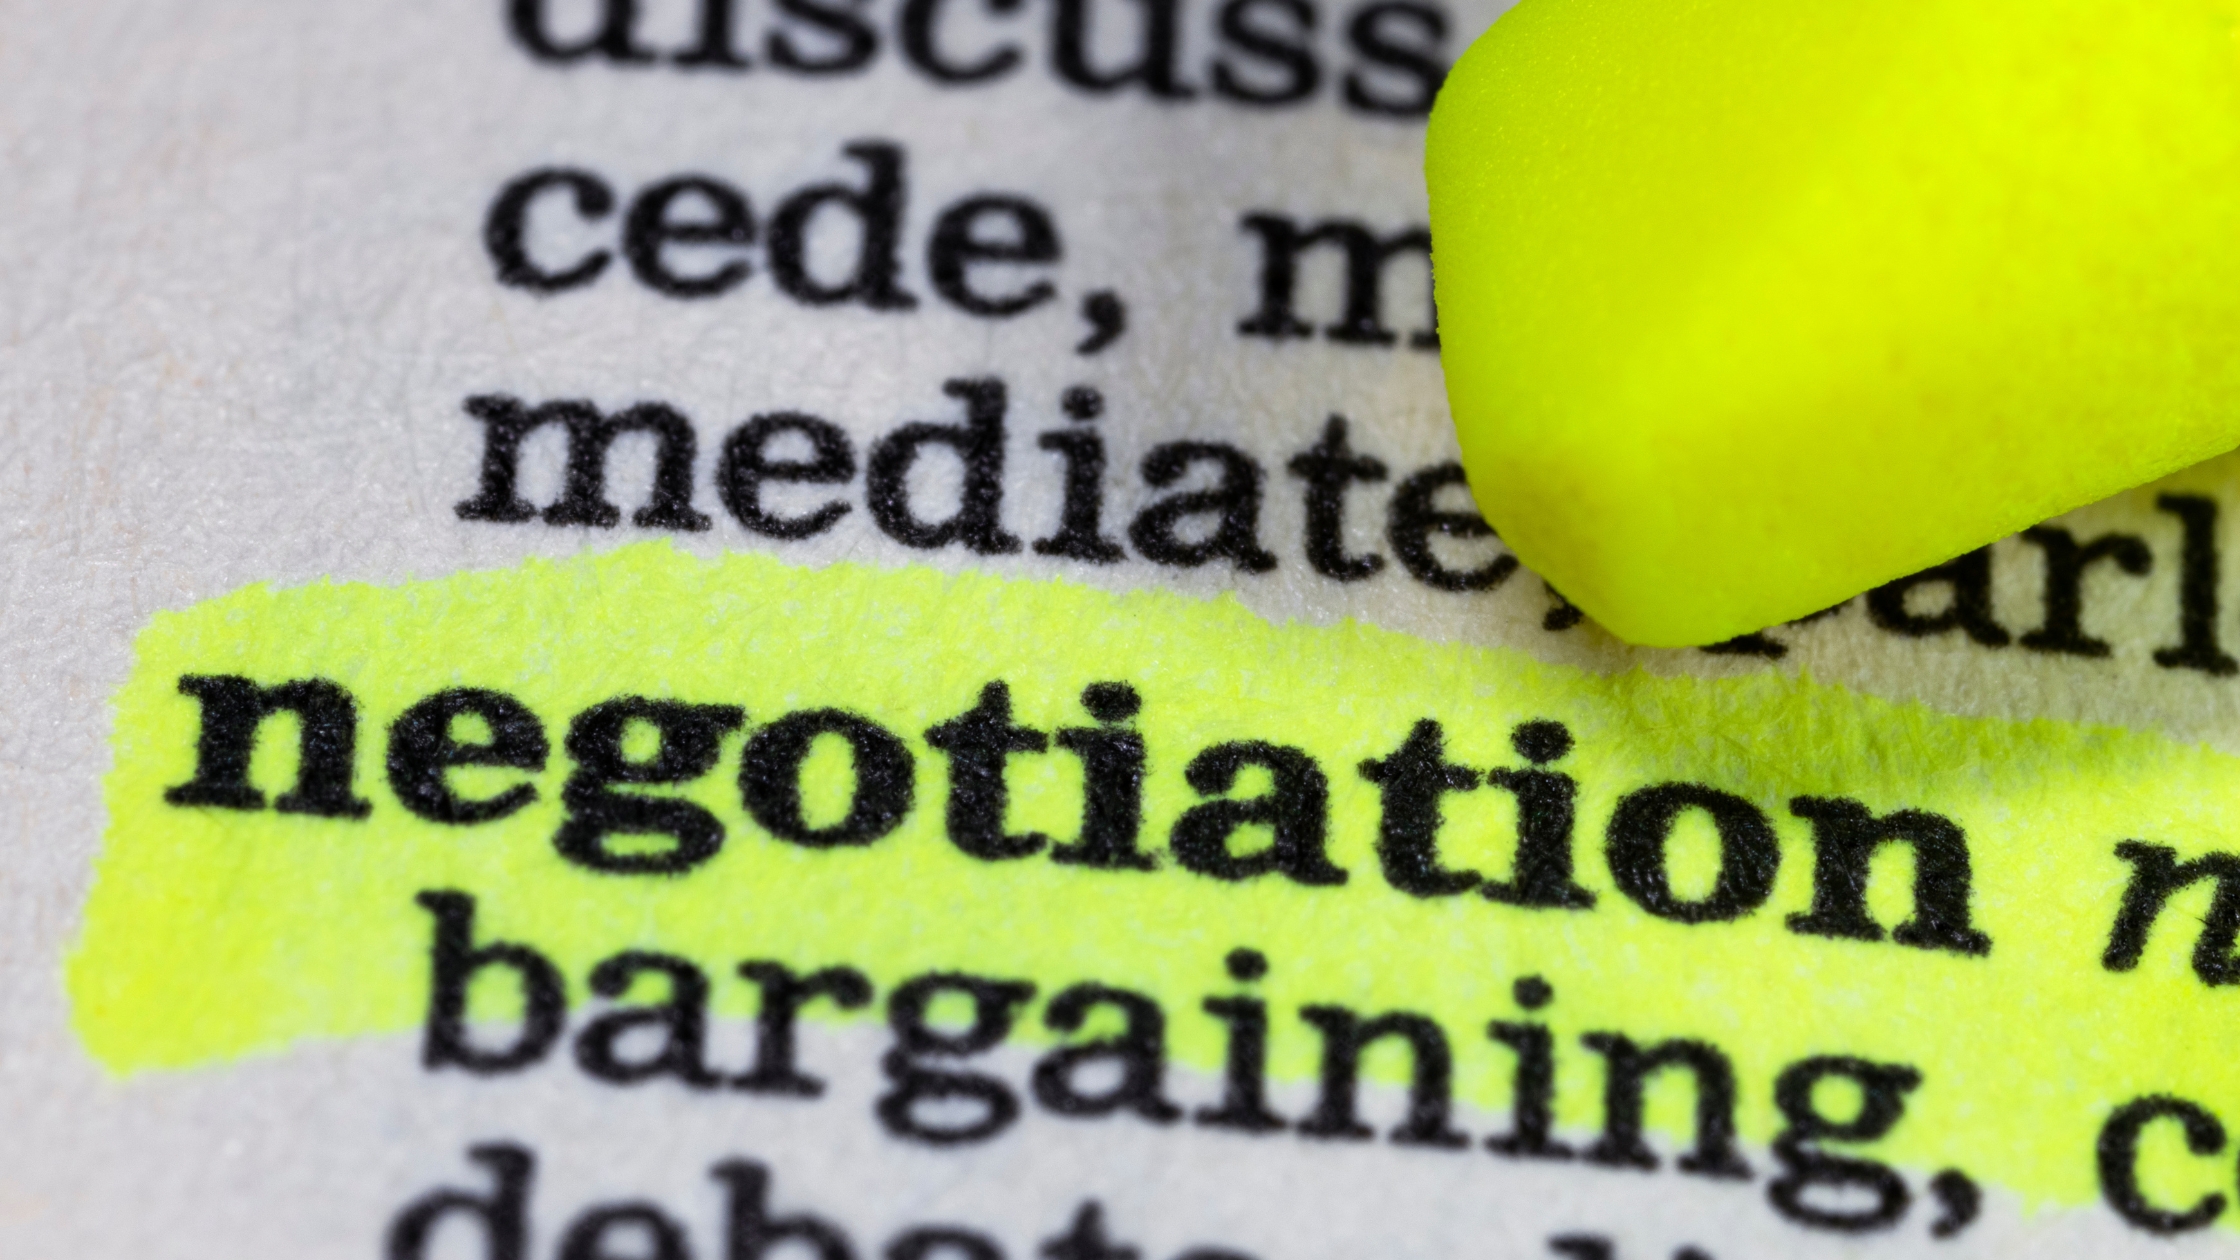 Navigating Debt Negotiation: Image of a dictionary open to a page with the word "negotiation" highlighted in yellow marker. Text around the highlighted word includes "cede," "mediate," "bargaining," and "concede." This image represents planning and research for debt negotiation.